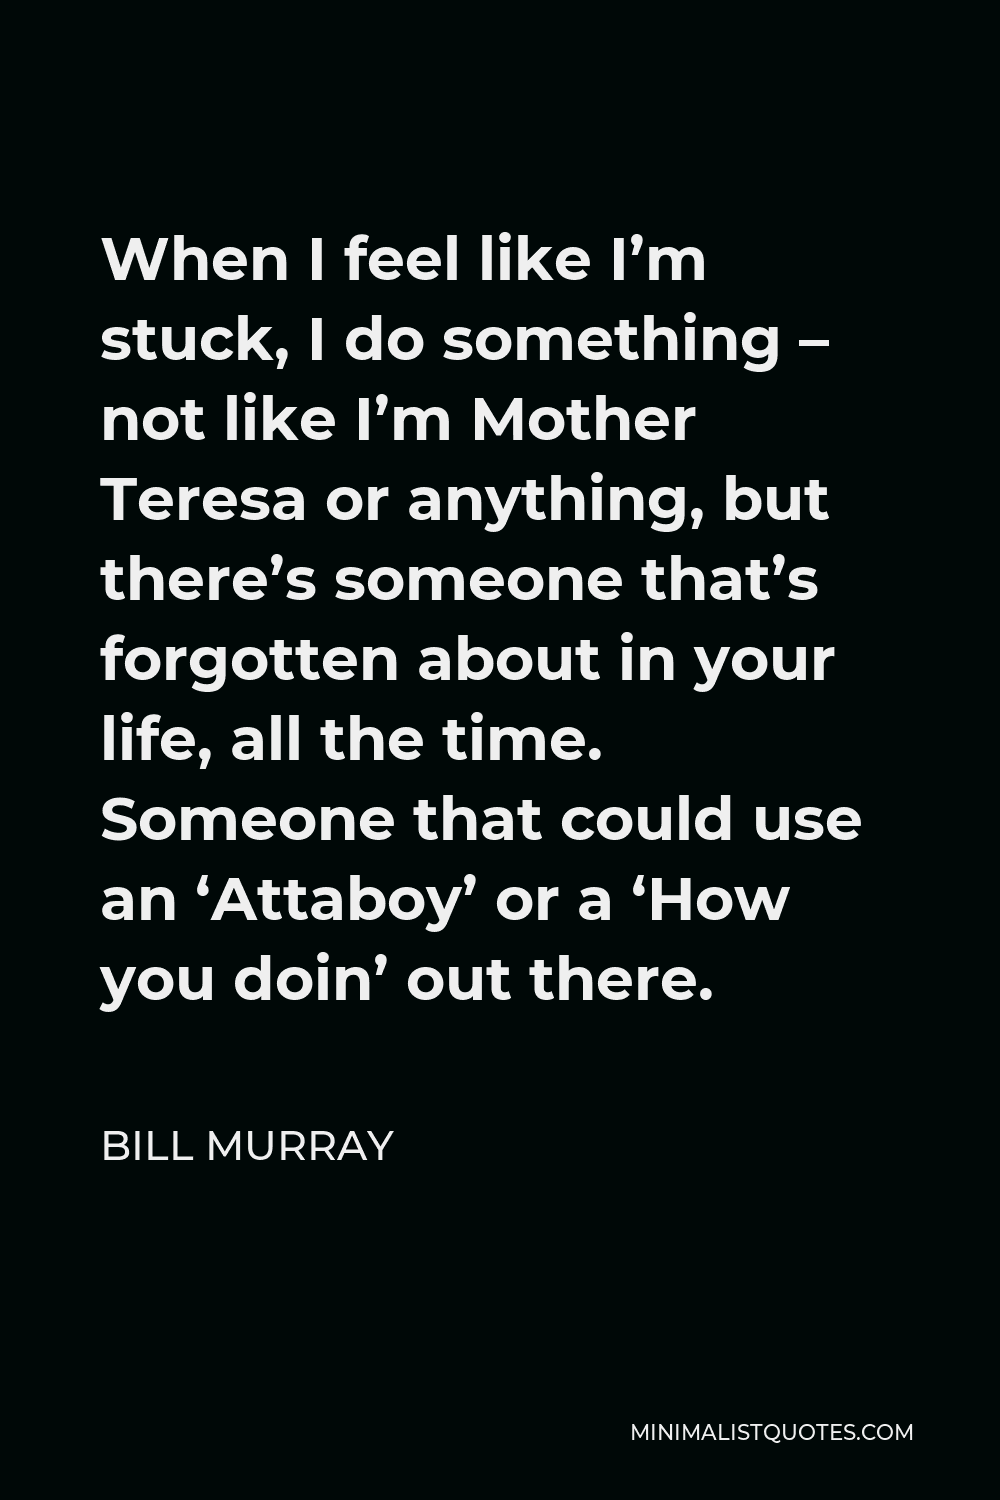 Bill Murray Quote - When I feel like I’m stuck, I do something – not like I’m Mother Teresa or anything, but there’s someone that’s forgotten about in your life, all the time. Someone that could use an ‘Attaboy’ or a ‘How you doin’ out there.